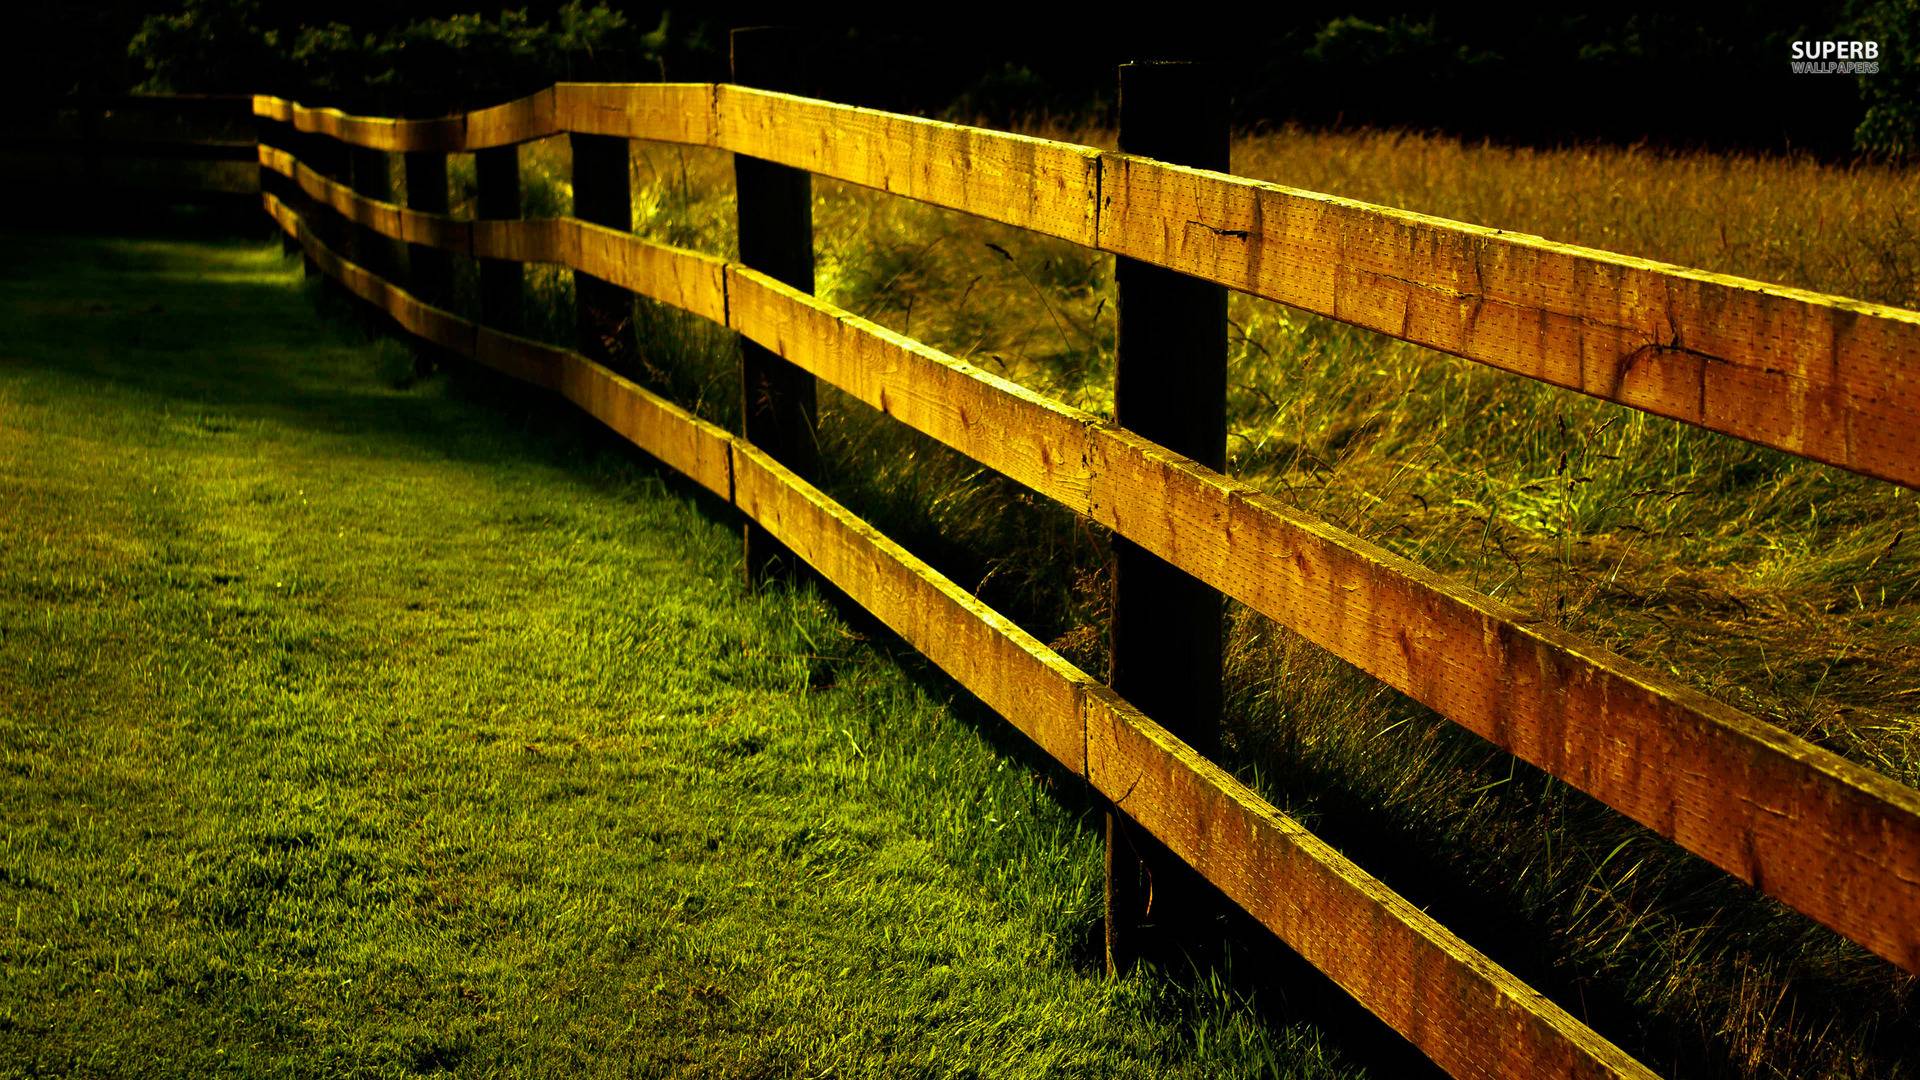 Countryside fence wallpaper wallpaper - #